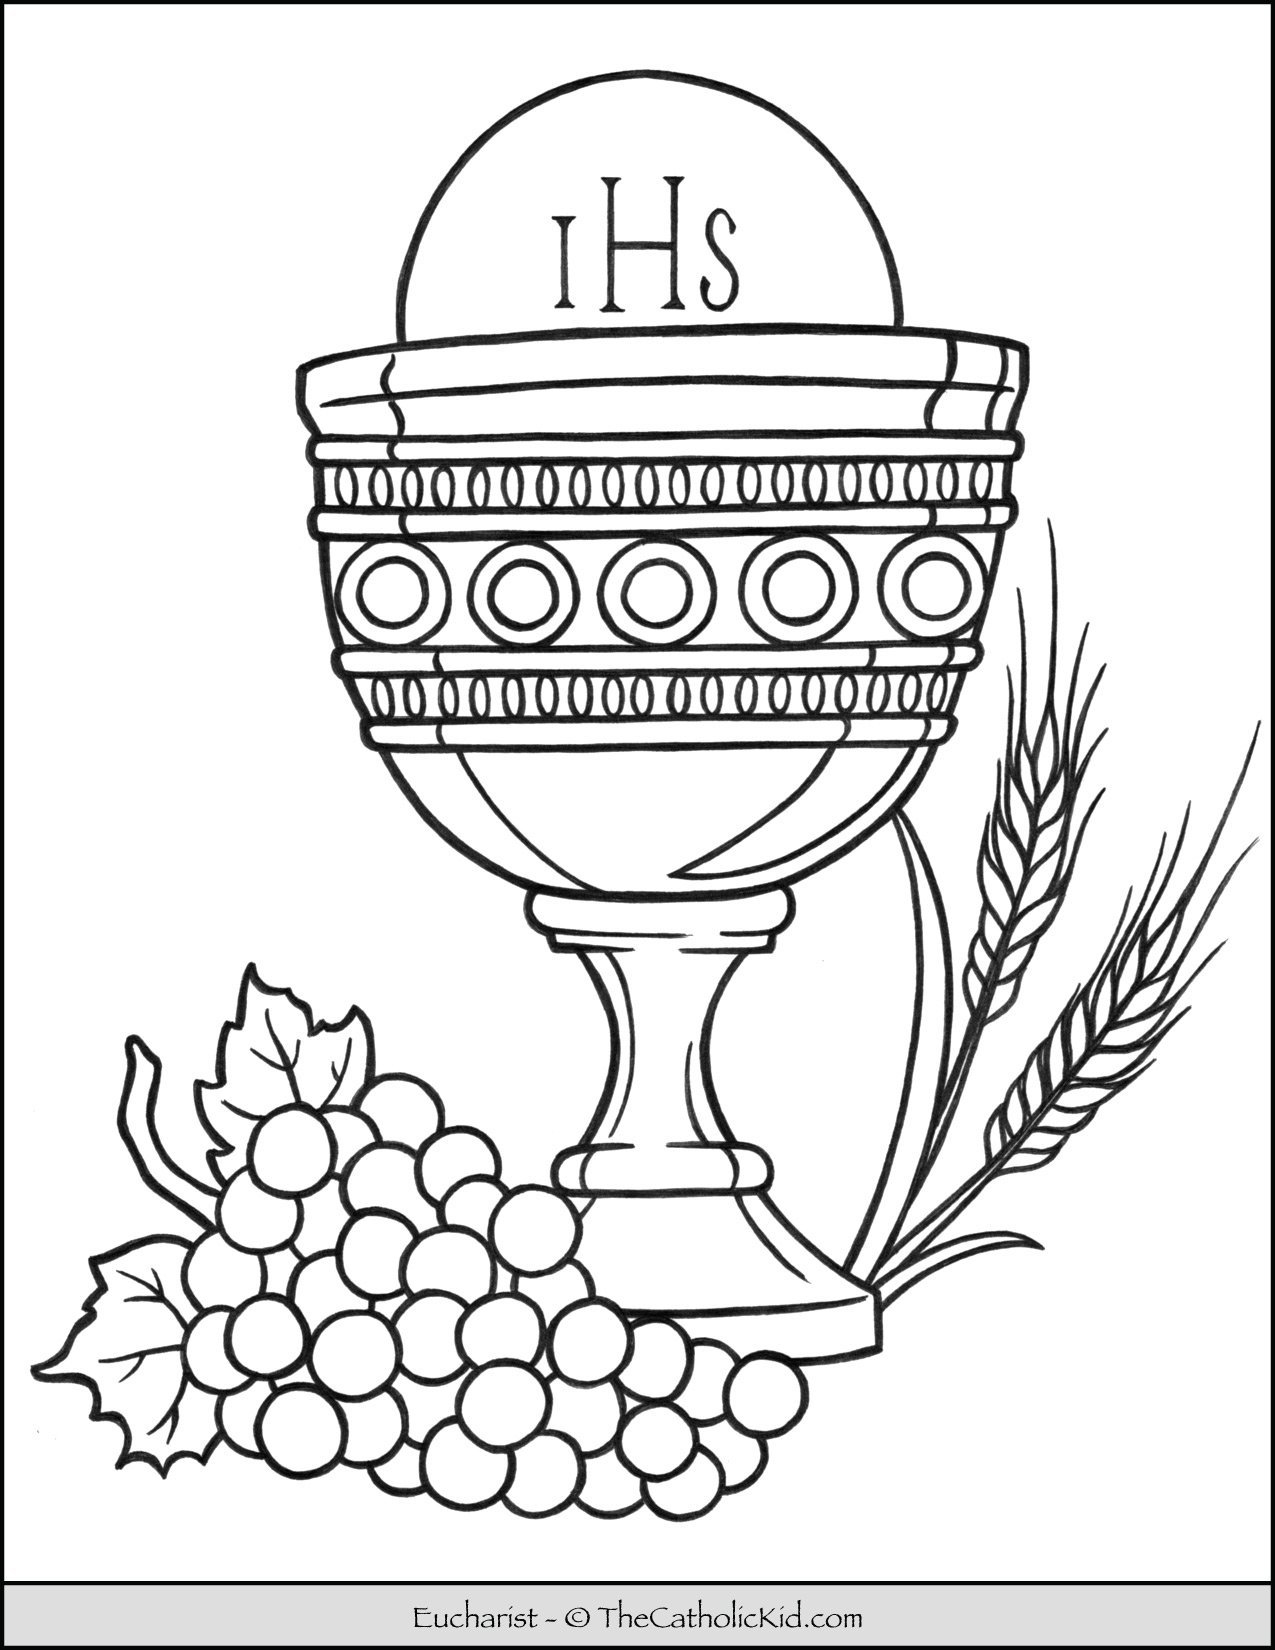 Sacrament of the eucharist coloring pages